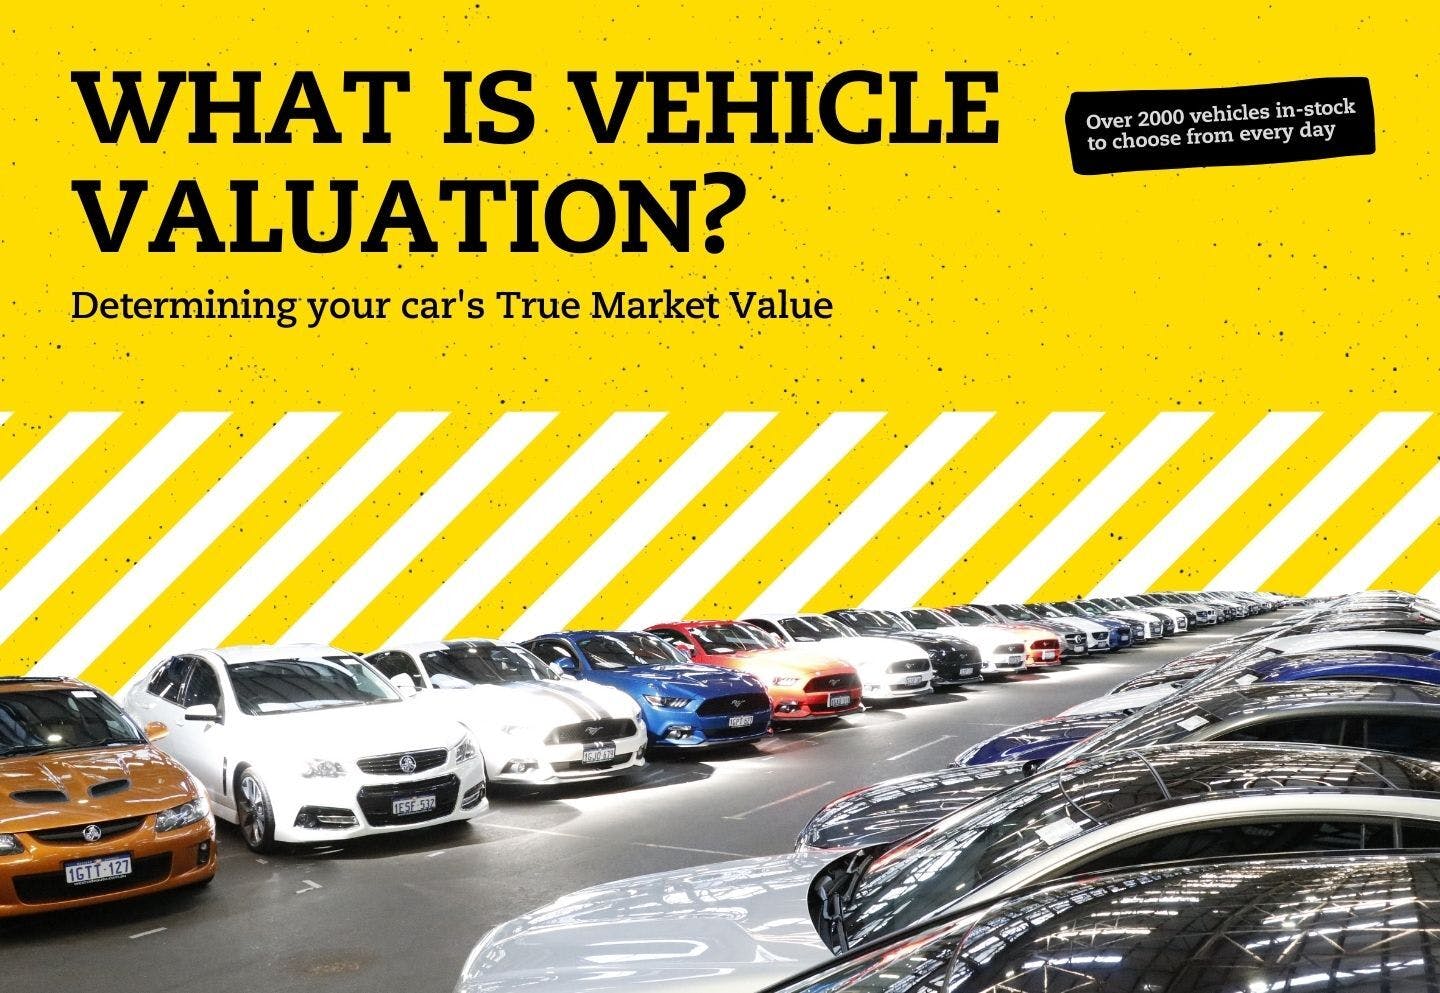 https://wsa-website-assets.s3.amazonaws.com/assets/images/What-is-Vehicle-Valuation.jpg